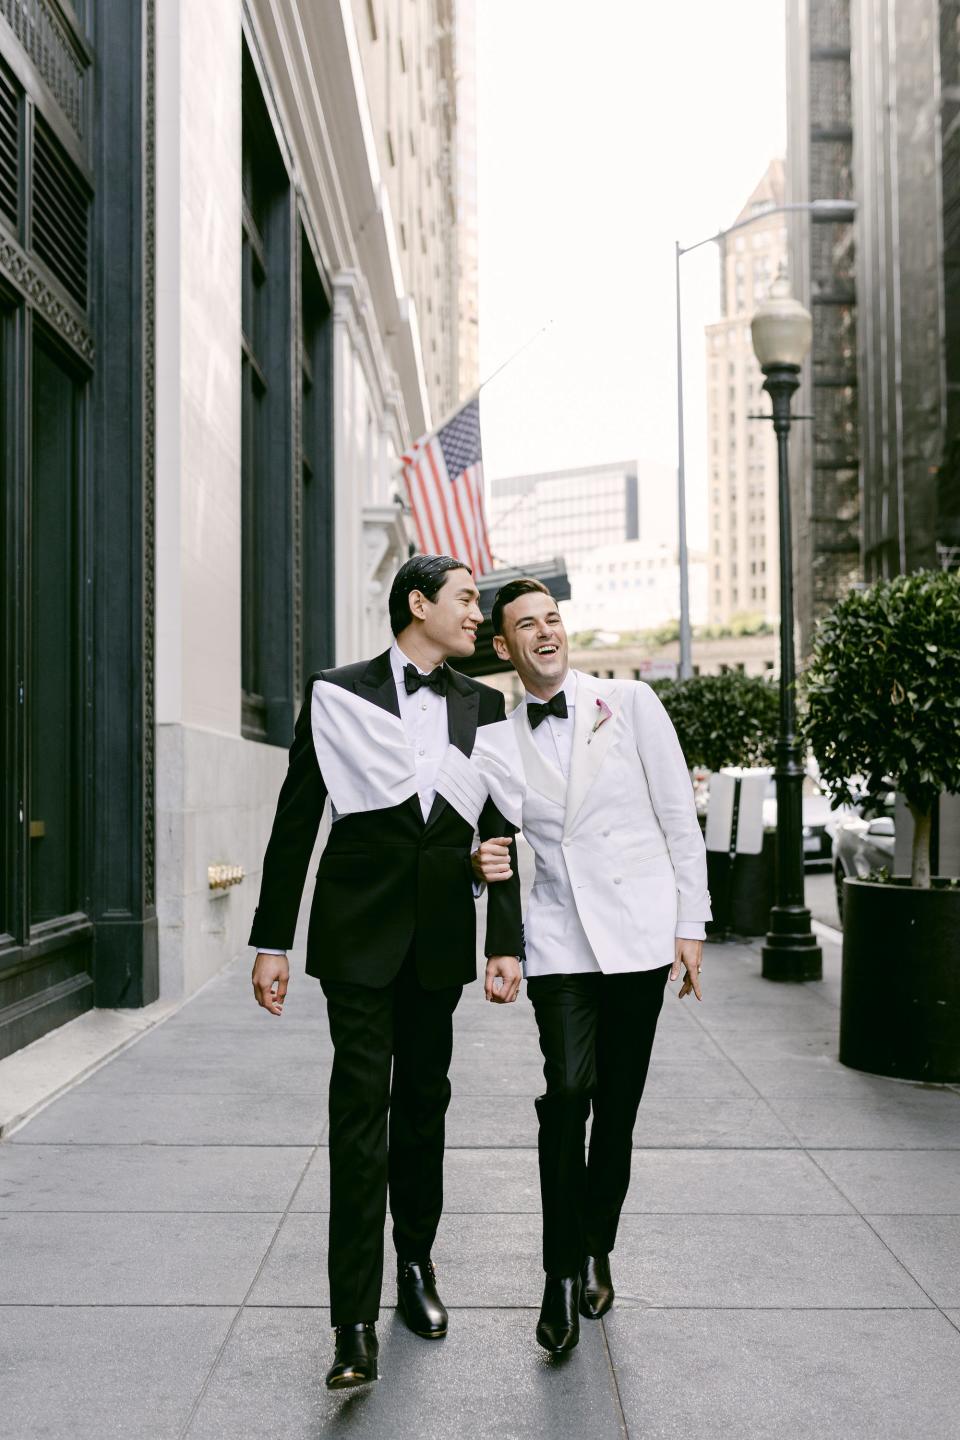 Two grooms look at each other and smile on a busy street.